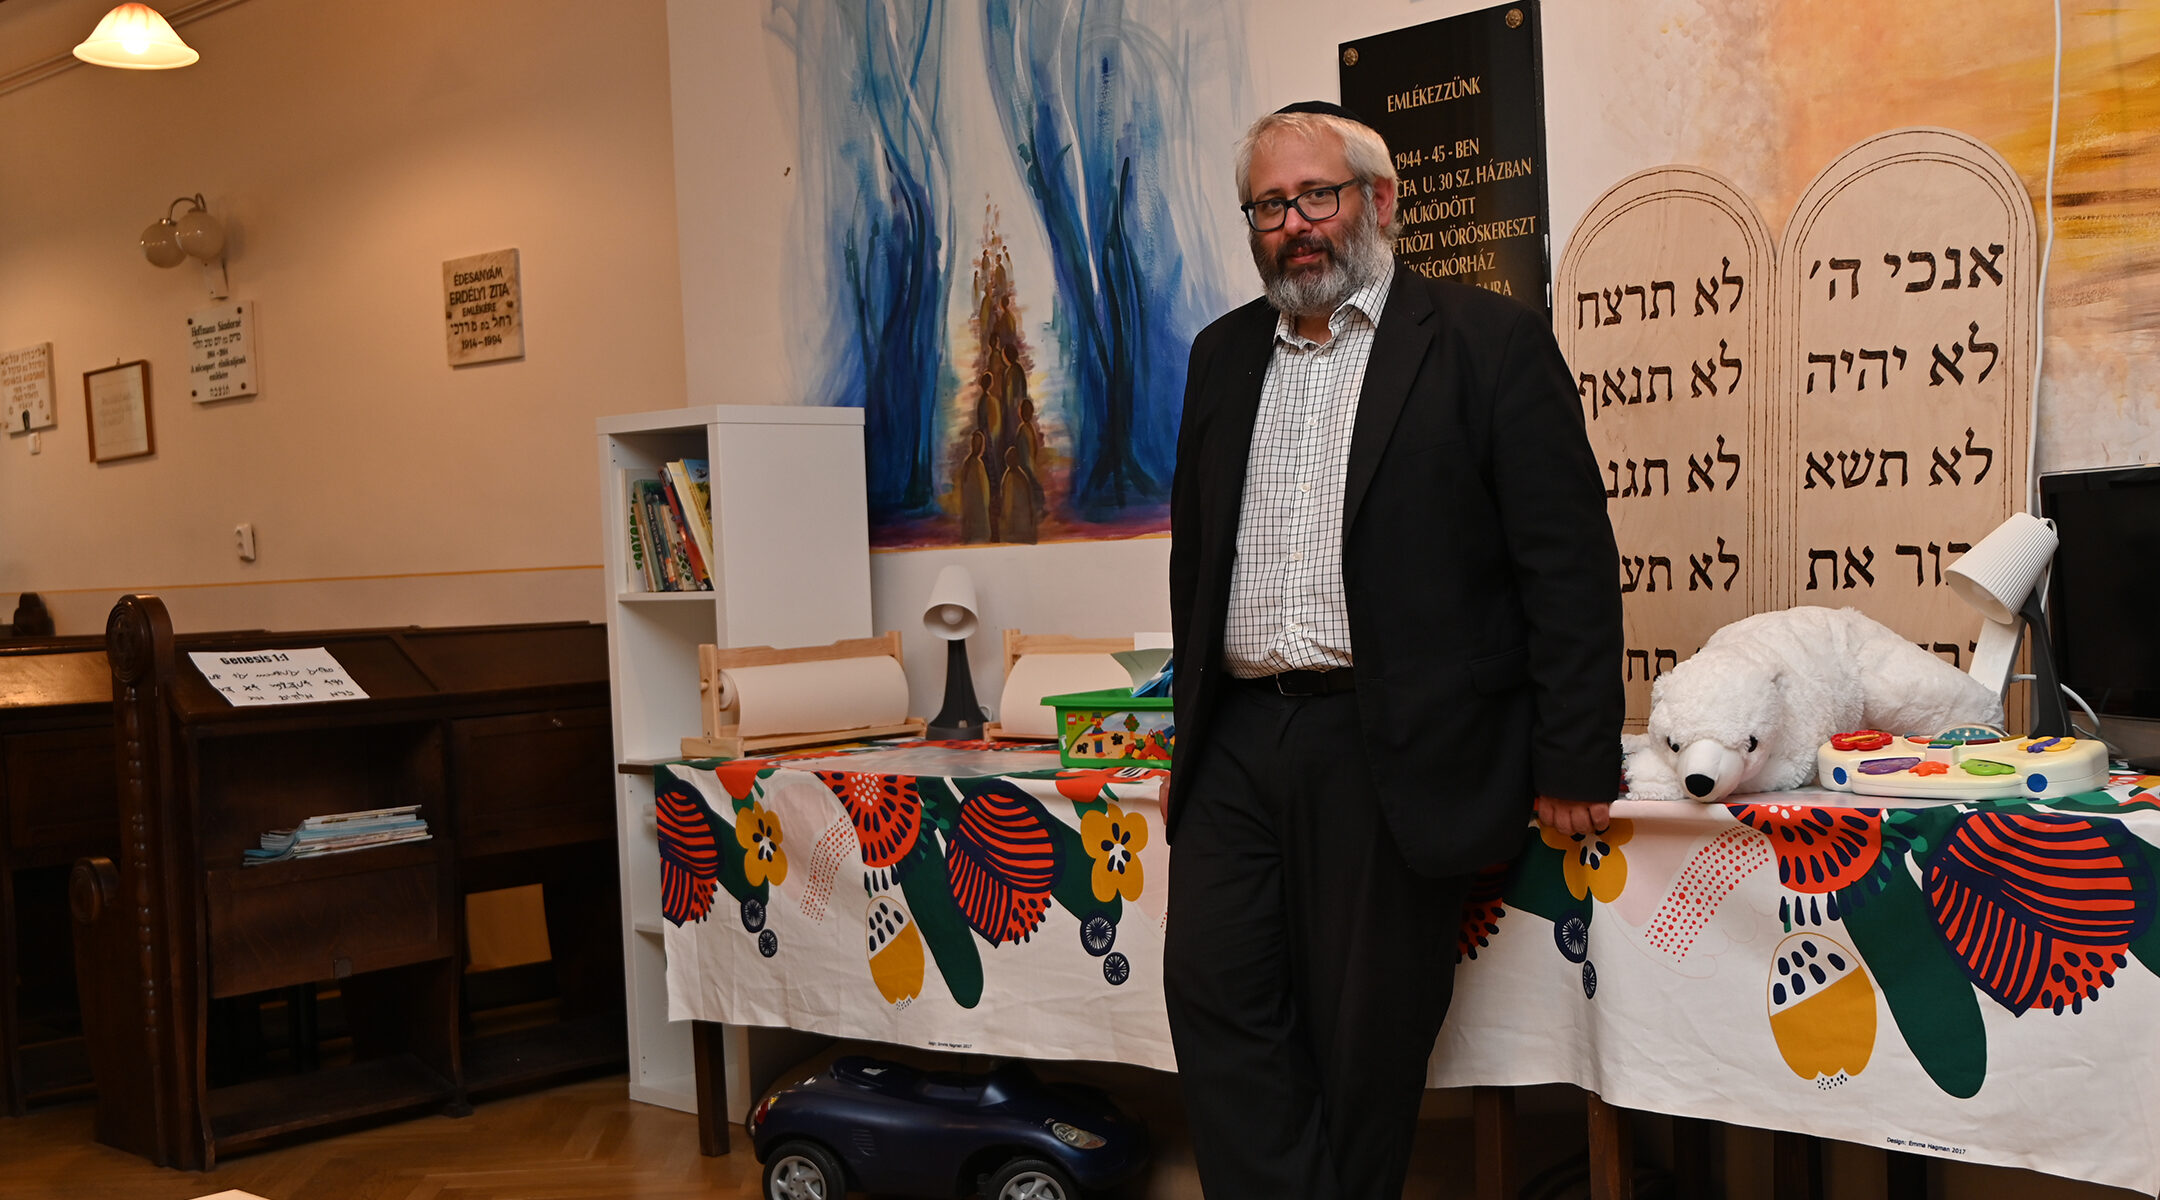 Rabbi Gabor Finali leans against the play corner at his apartment-sized synagogue in Budapest, Hungary on Aug. 29, 2021. (Cnaan Liphshiz)